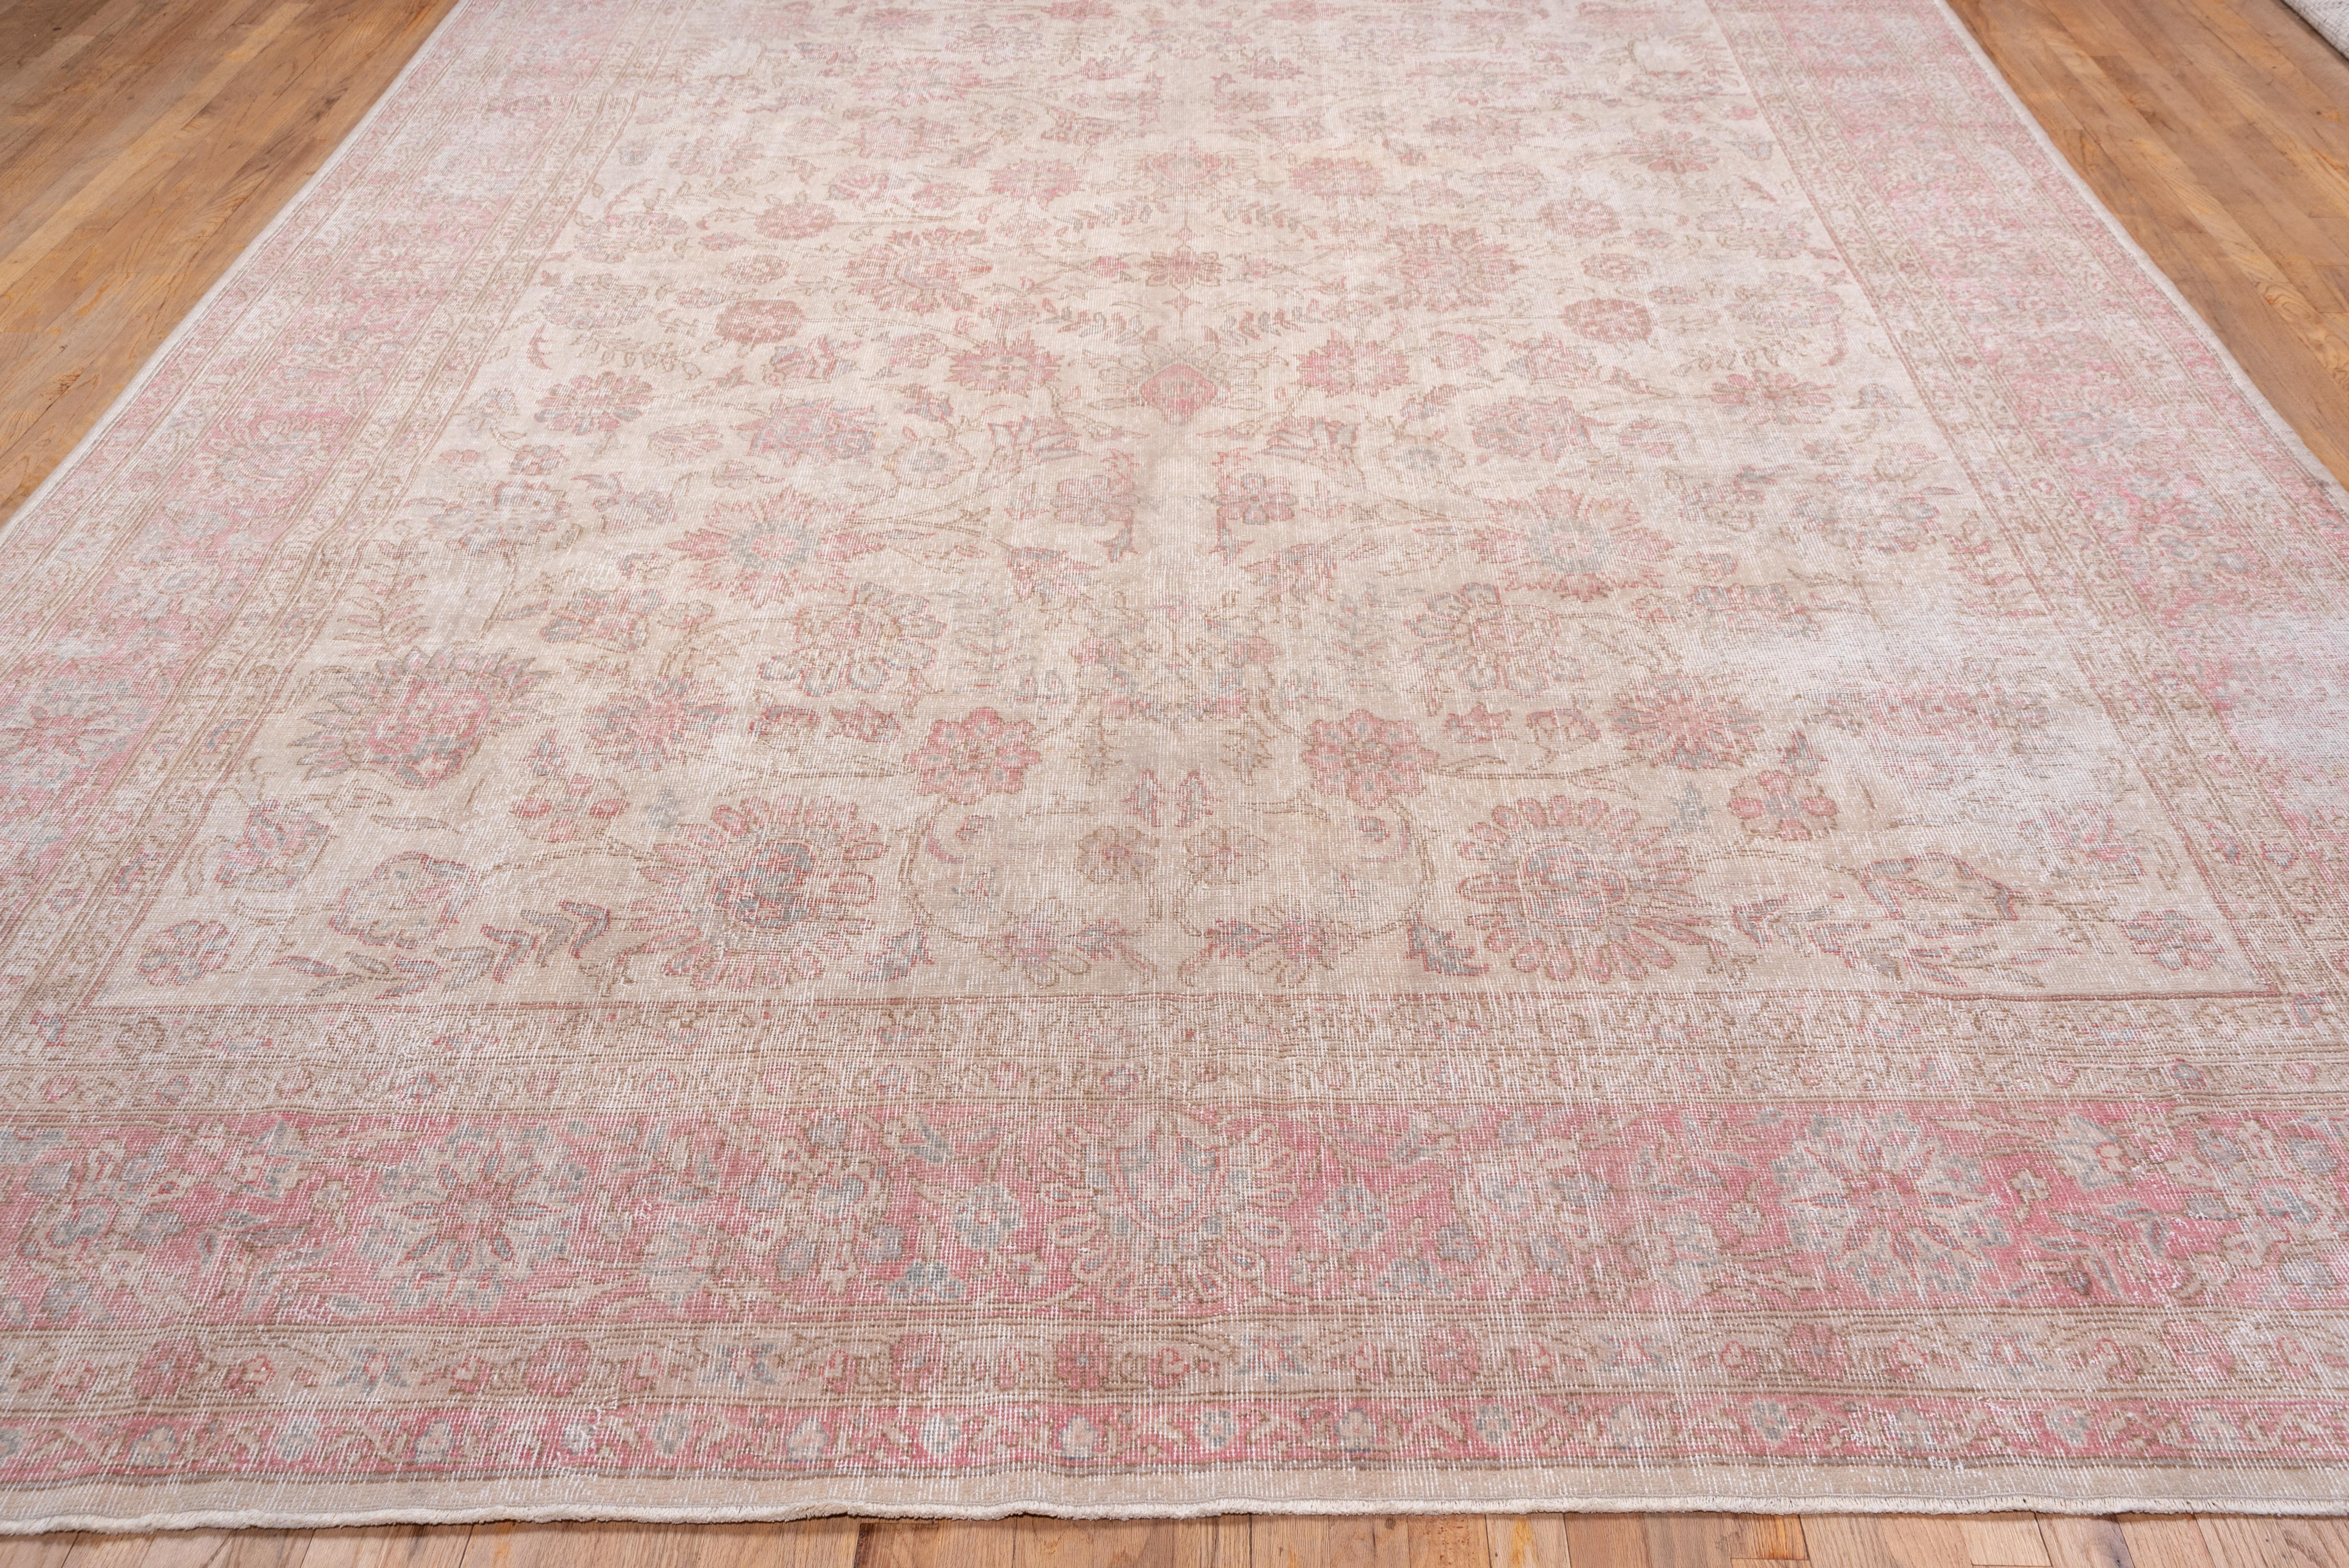 This somewhat worn to nearly distressed carpet shows a cream field with an all-over petal rosette, leafy stem, vine and bud-palmette pattern detailed in tones of medium pink to light brown.